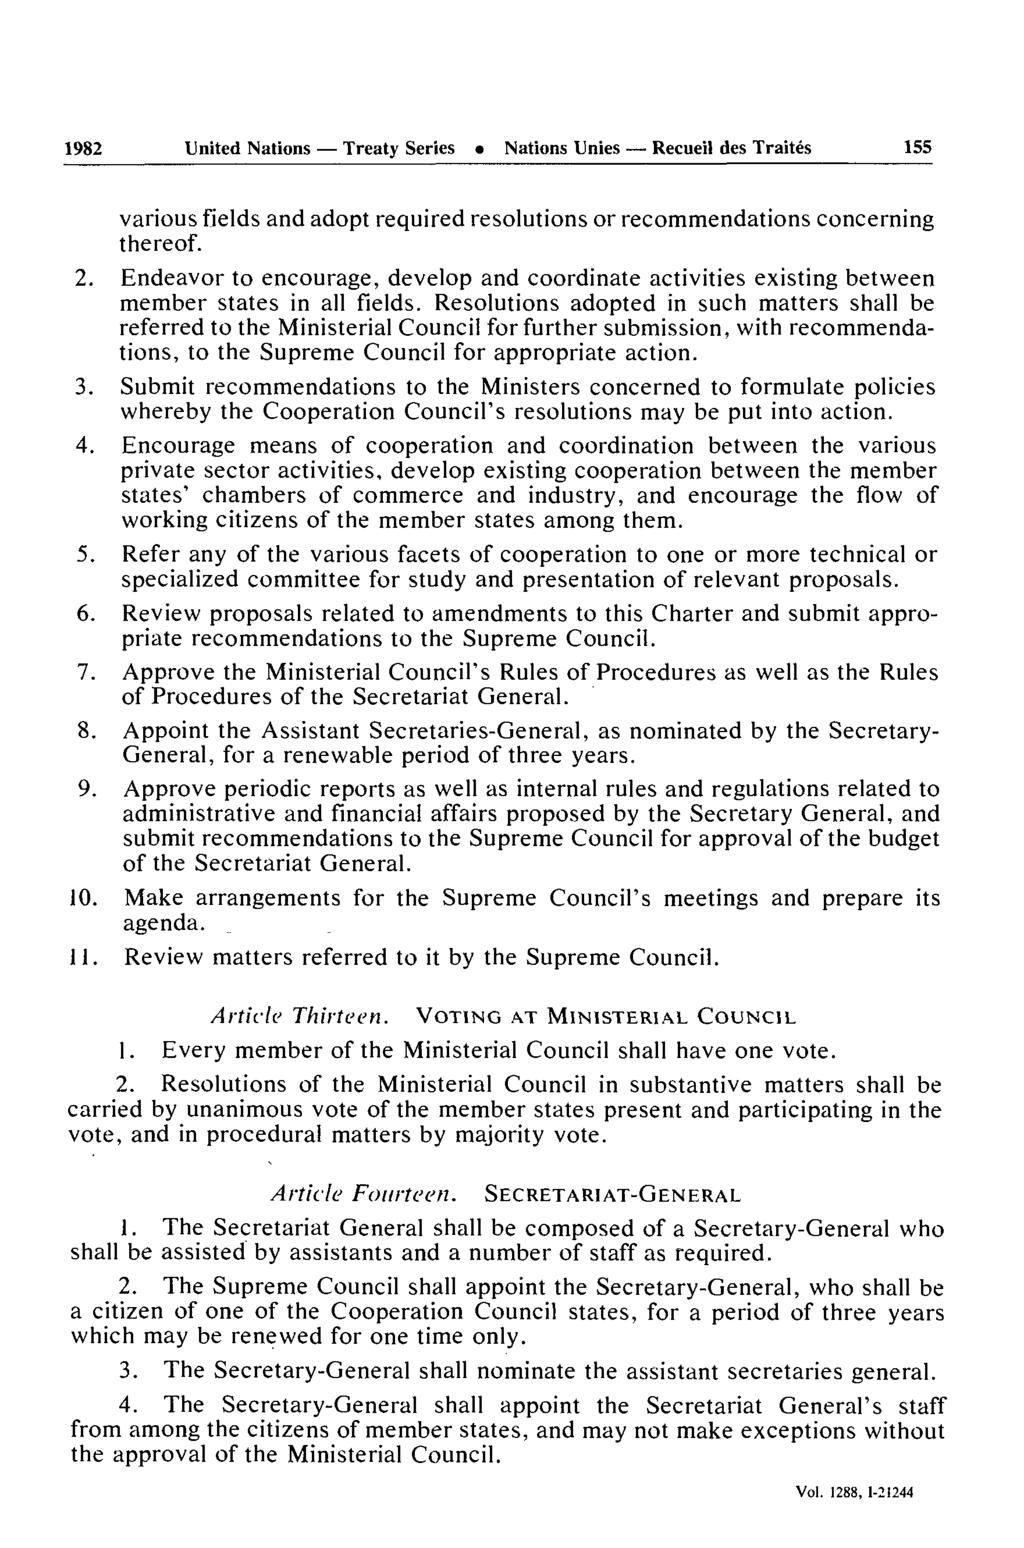 1982 United Nations Treaty Series Nations Unies Recueil des Traités 155 various fields and adopt required resolutions or recommendations concerning thereof. 2.